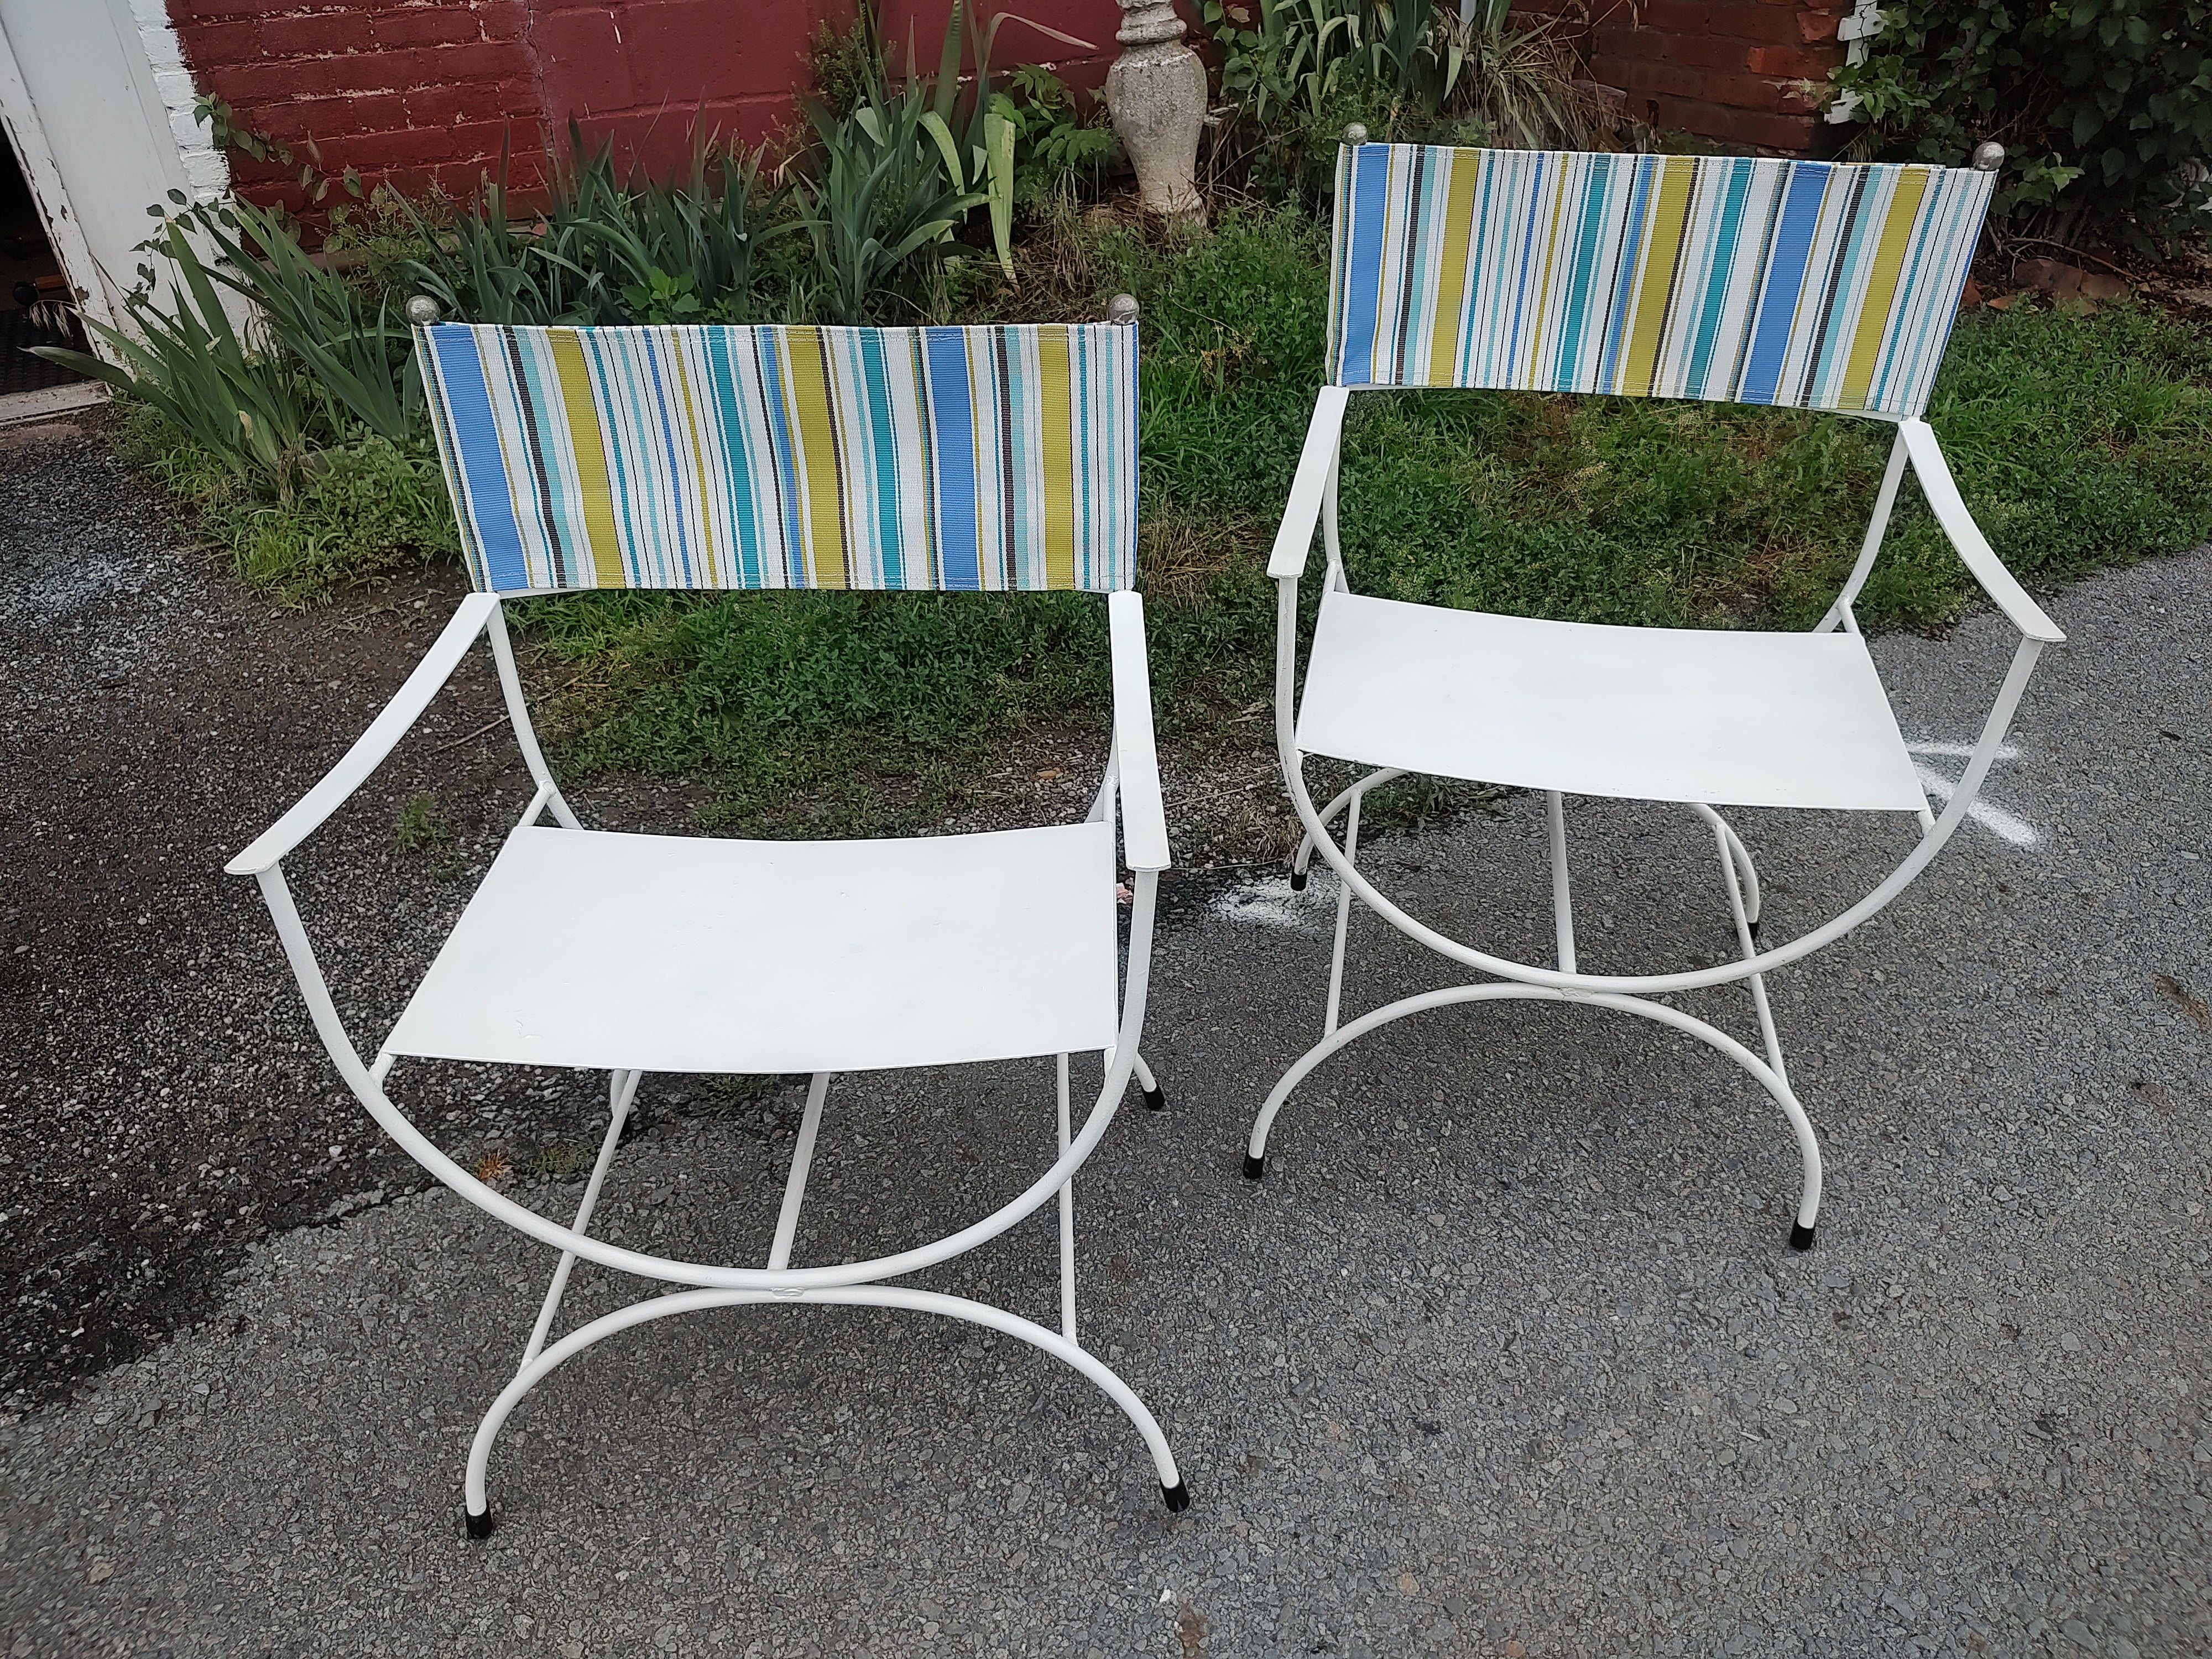 Pair of Mid Century Modern Patio Directors Chairs with Sunbrella Backs 1960 For Sale 2